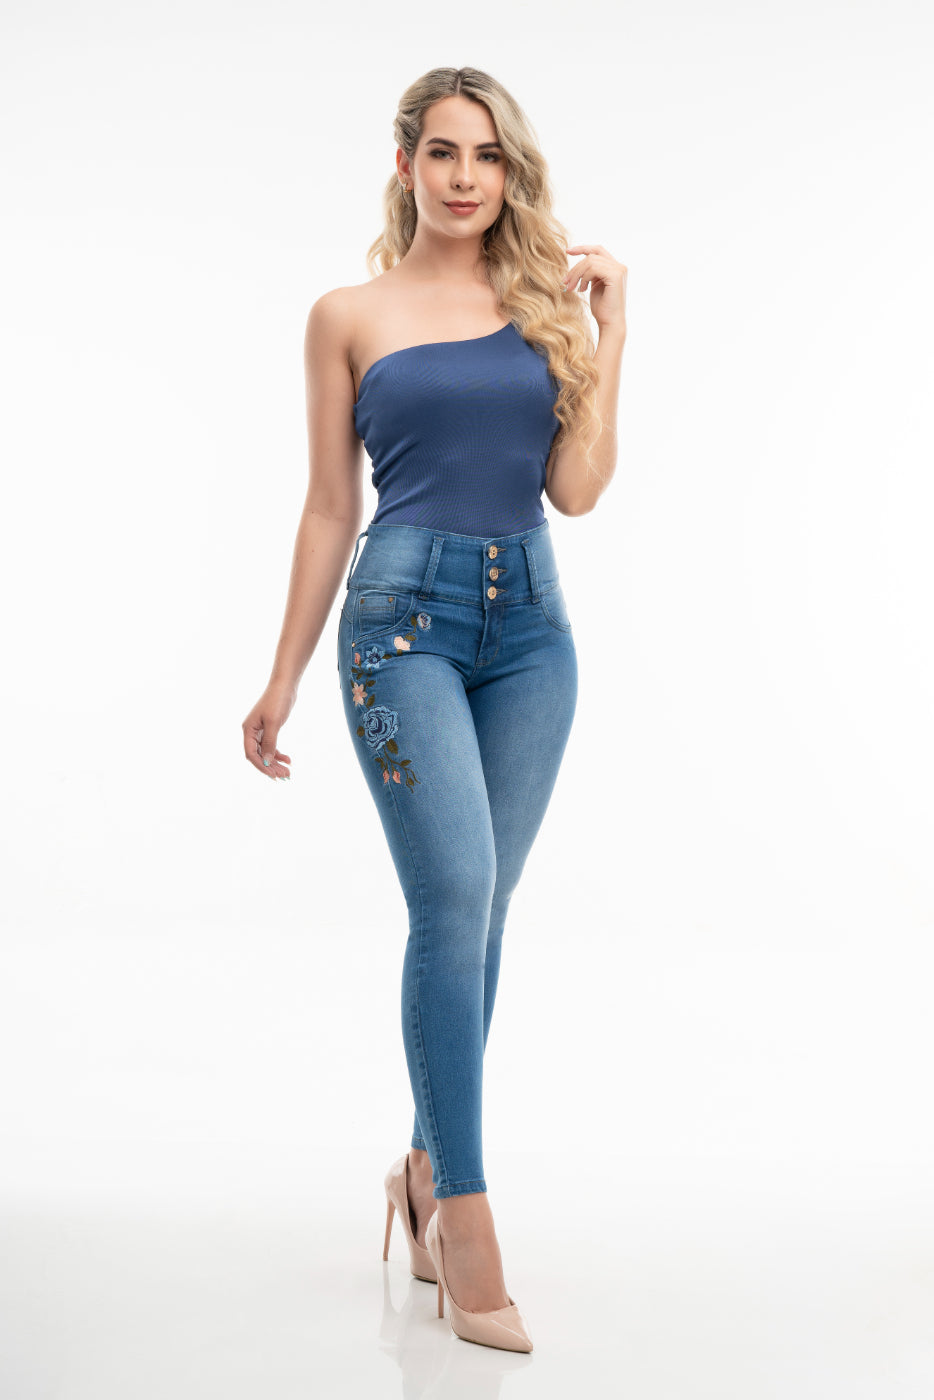 JEANS COLOMBIANOS KA1166 Authentic Colombian Push Up Jeans, jean Levanta  cola